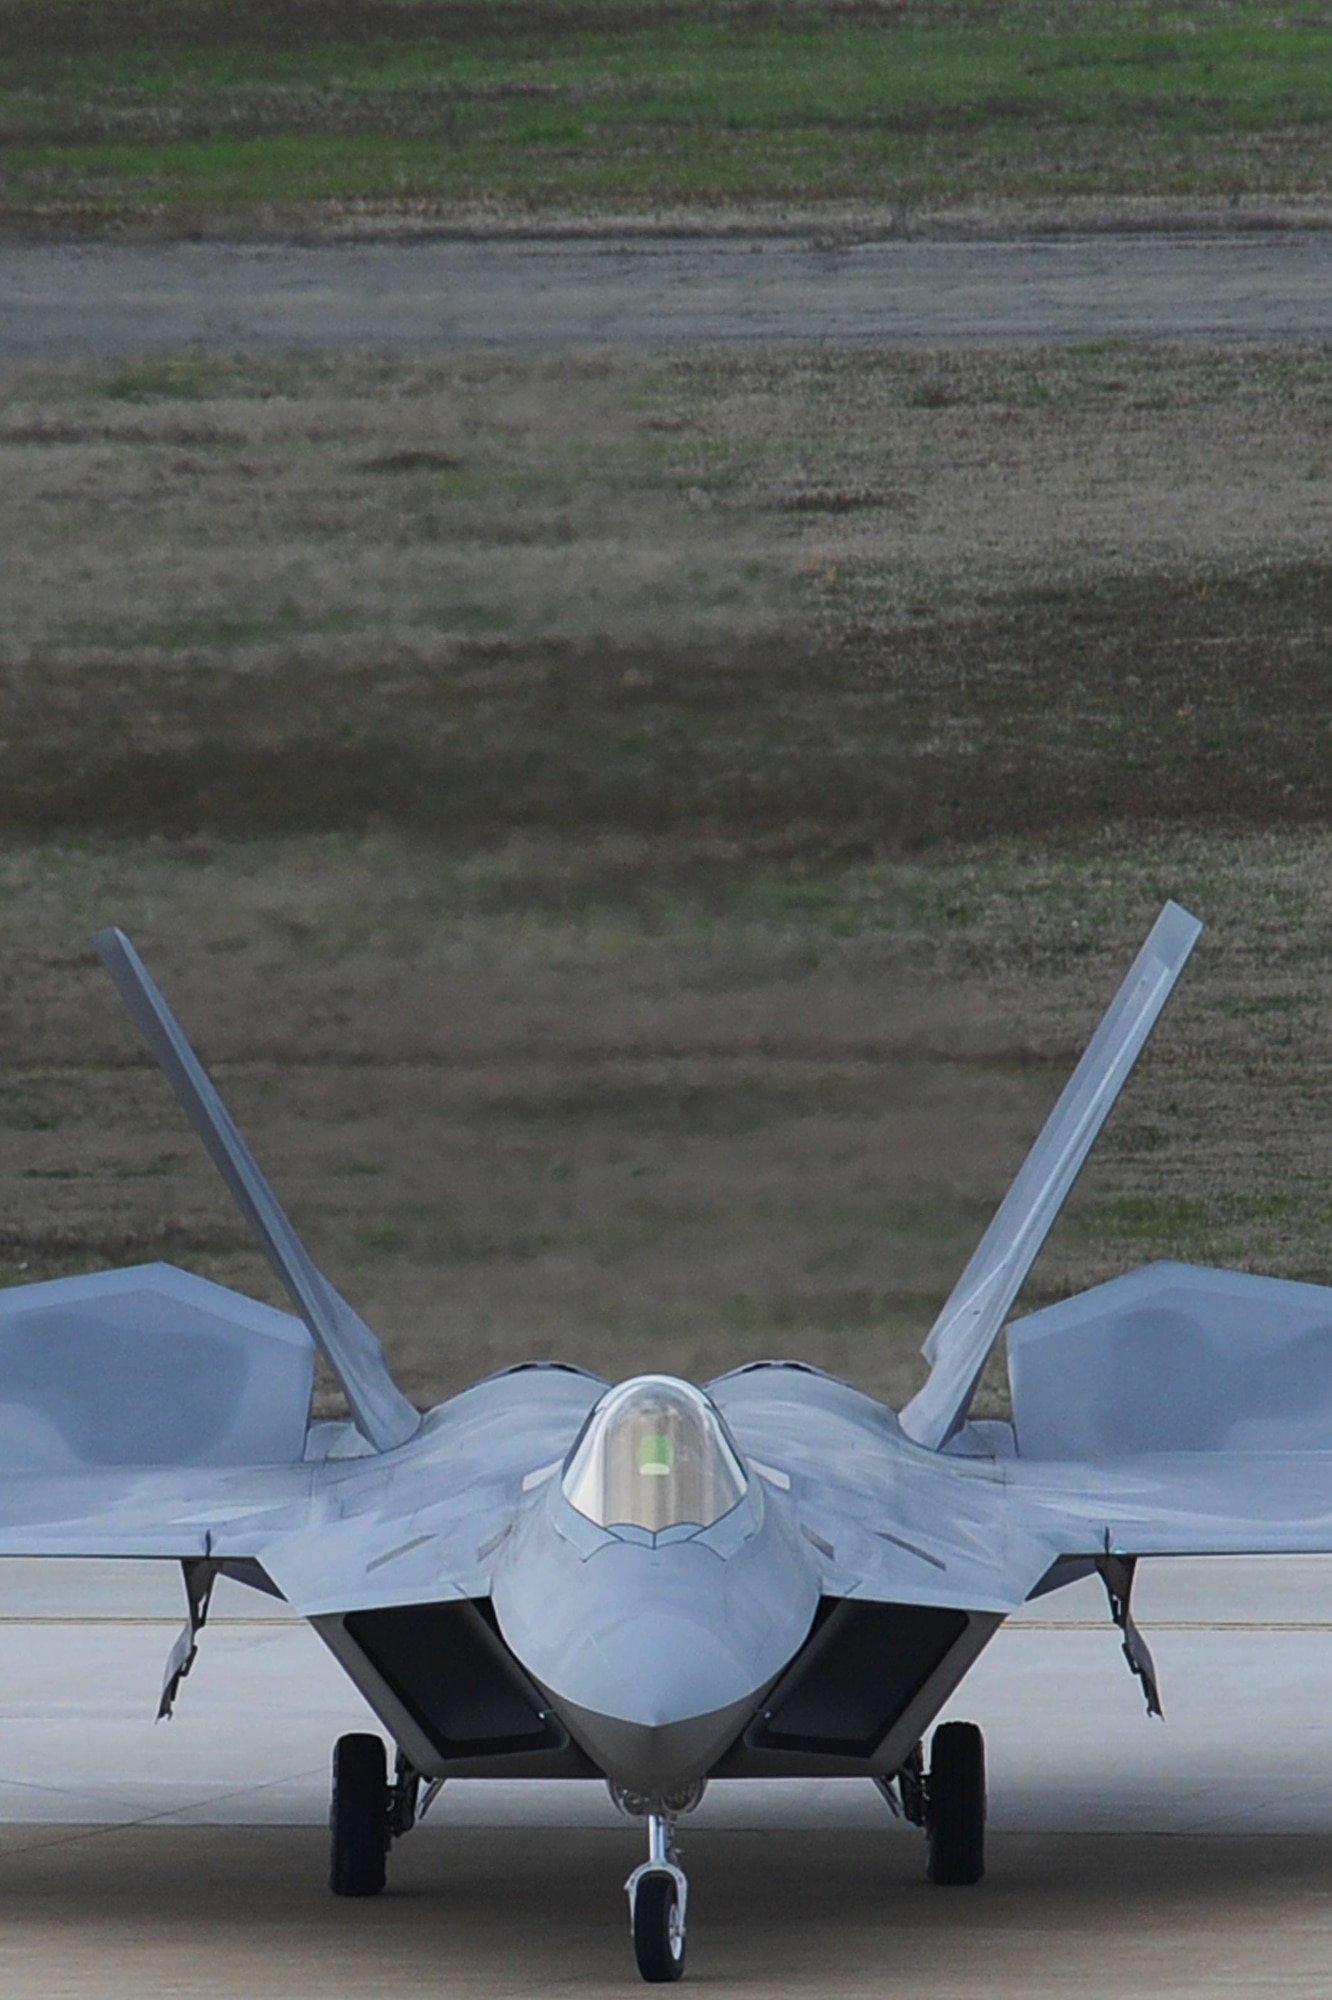 An F-22 Raptor arrives on the Langley Air Force Base, Va., flightline after escorting a T-38 Talon from Holloman AFB, N.M., April 1, 2011. The T-38 is temporarily assigned to the 1st Fighter Wing to support combat readiness training for the pilots. (U.S. Air Force photo by Senior Airman Brian Ybarbo/Released)

   